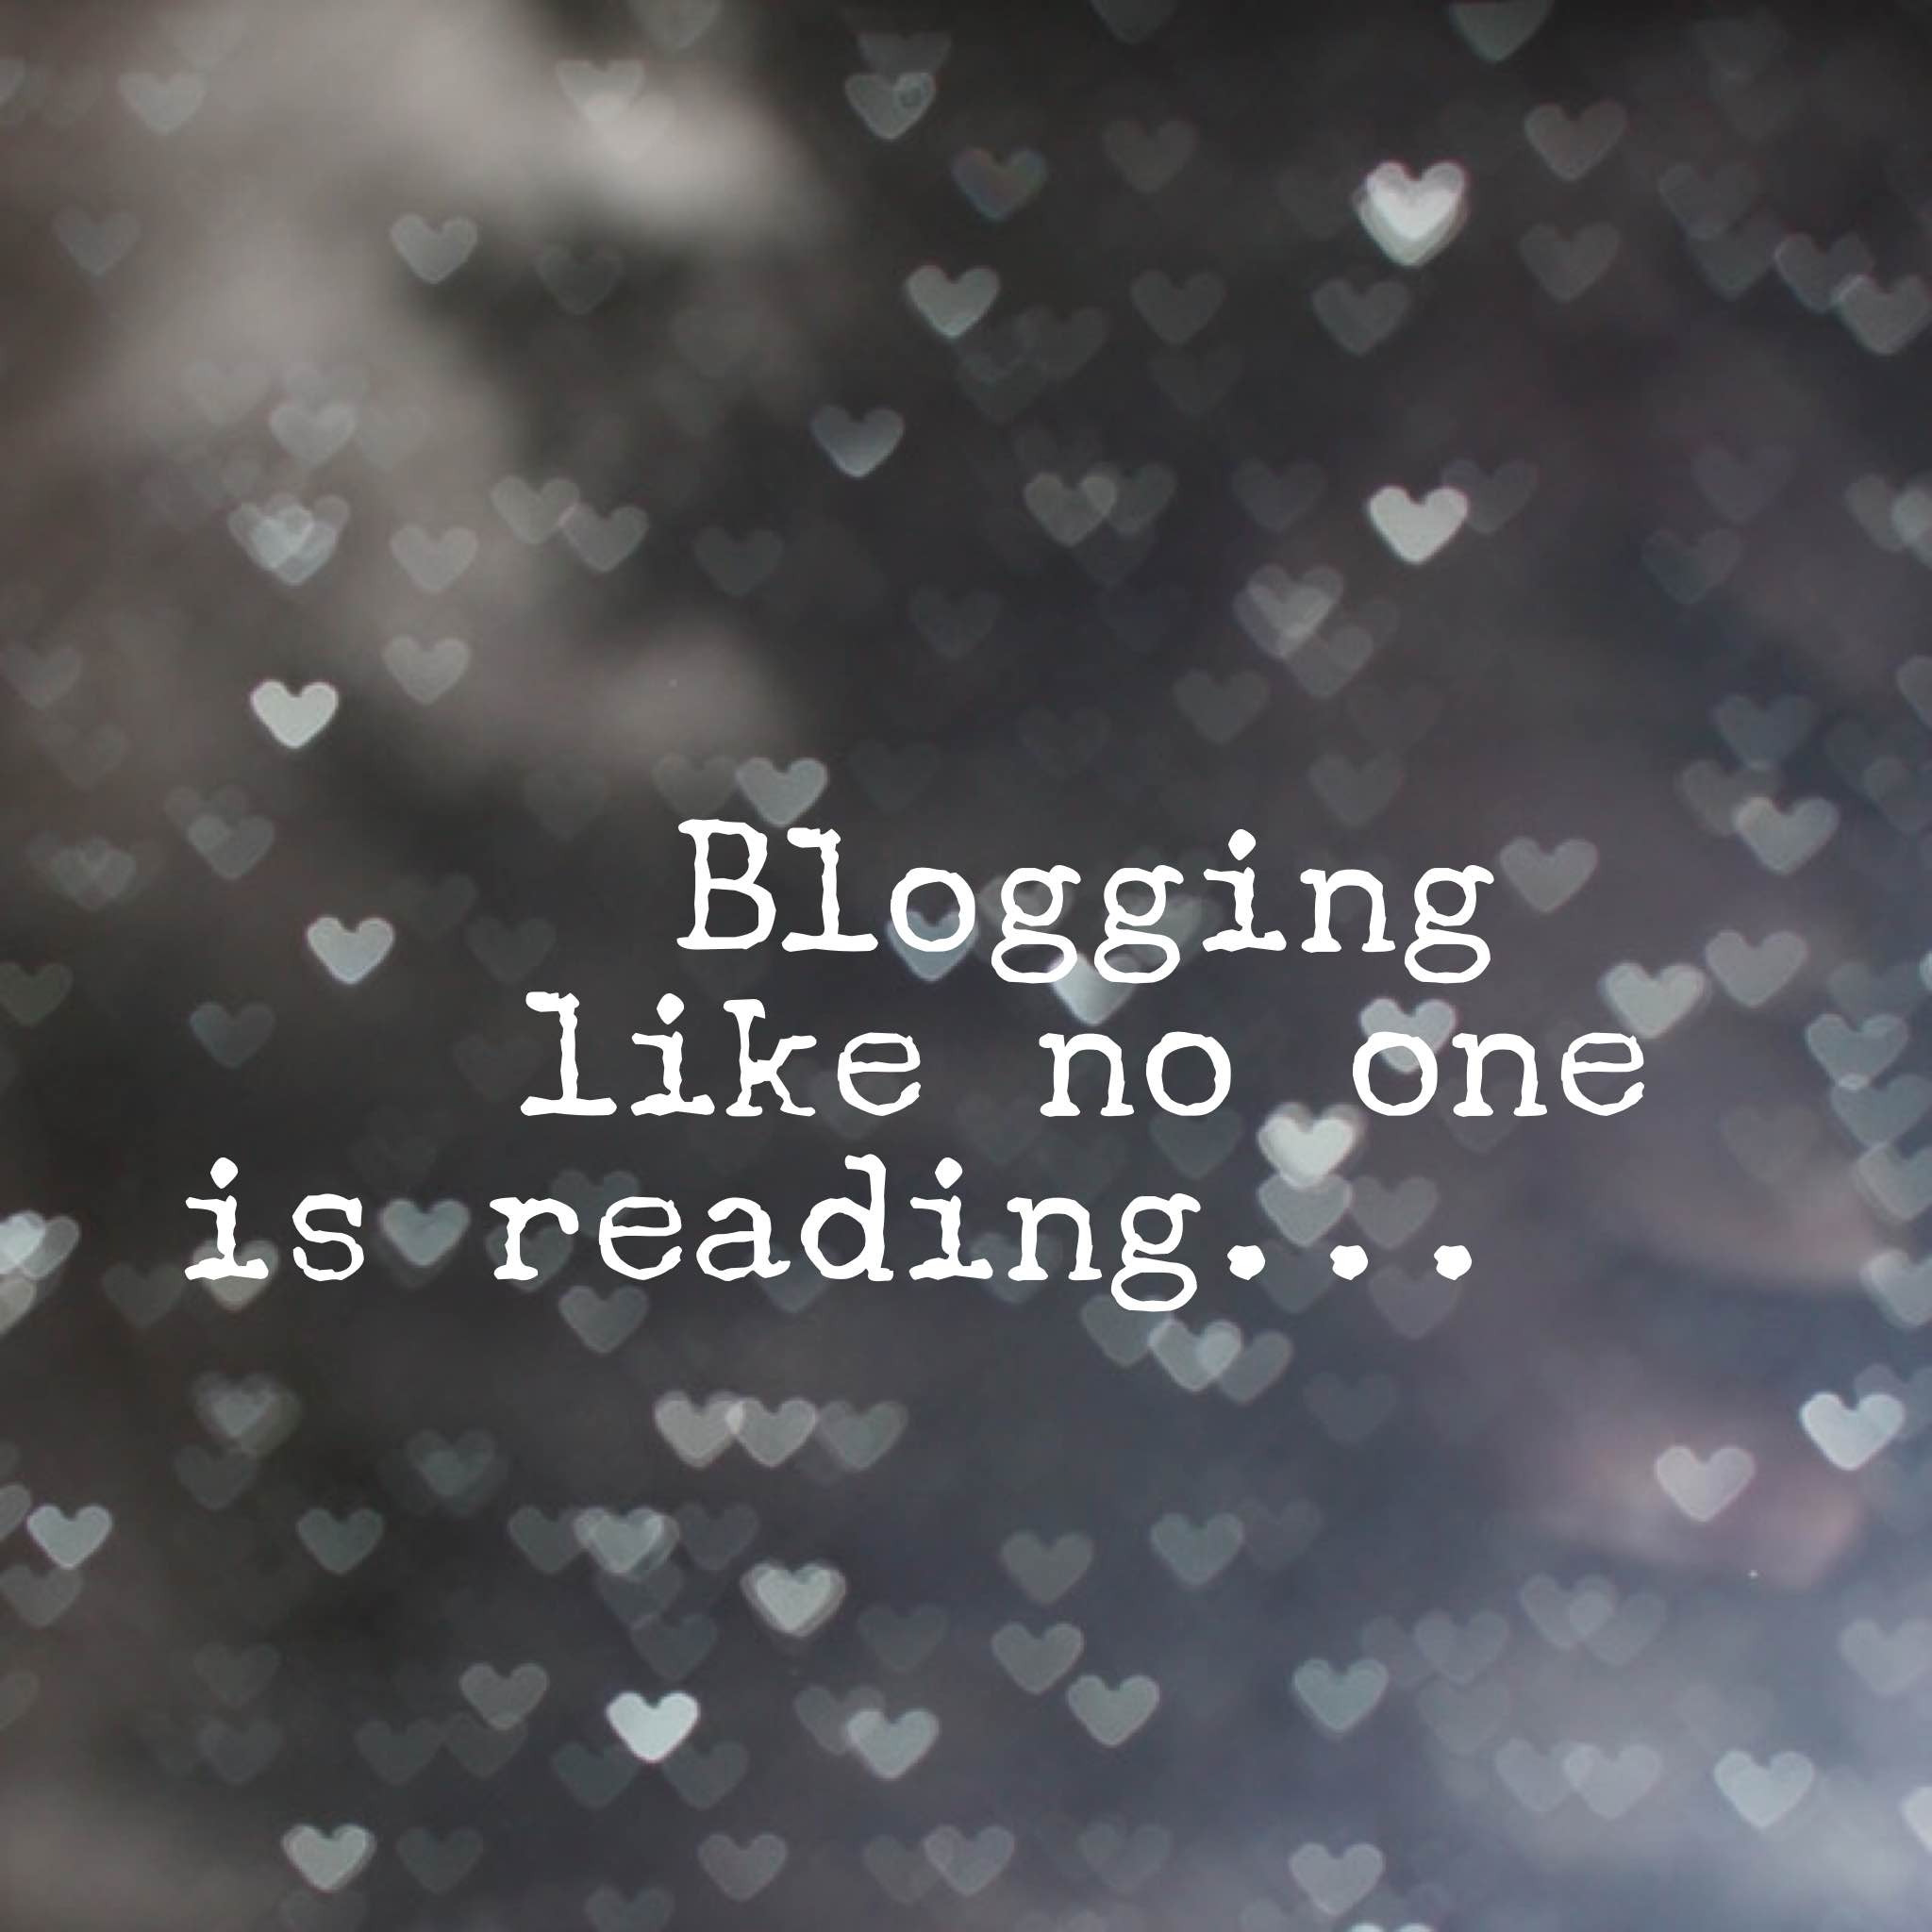 Blogging like no one is reading title pic